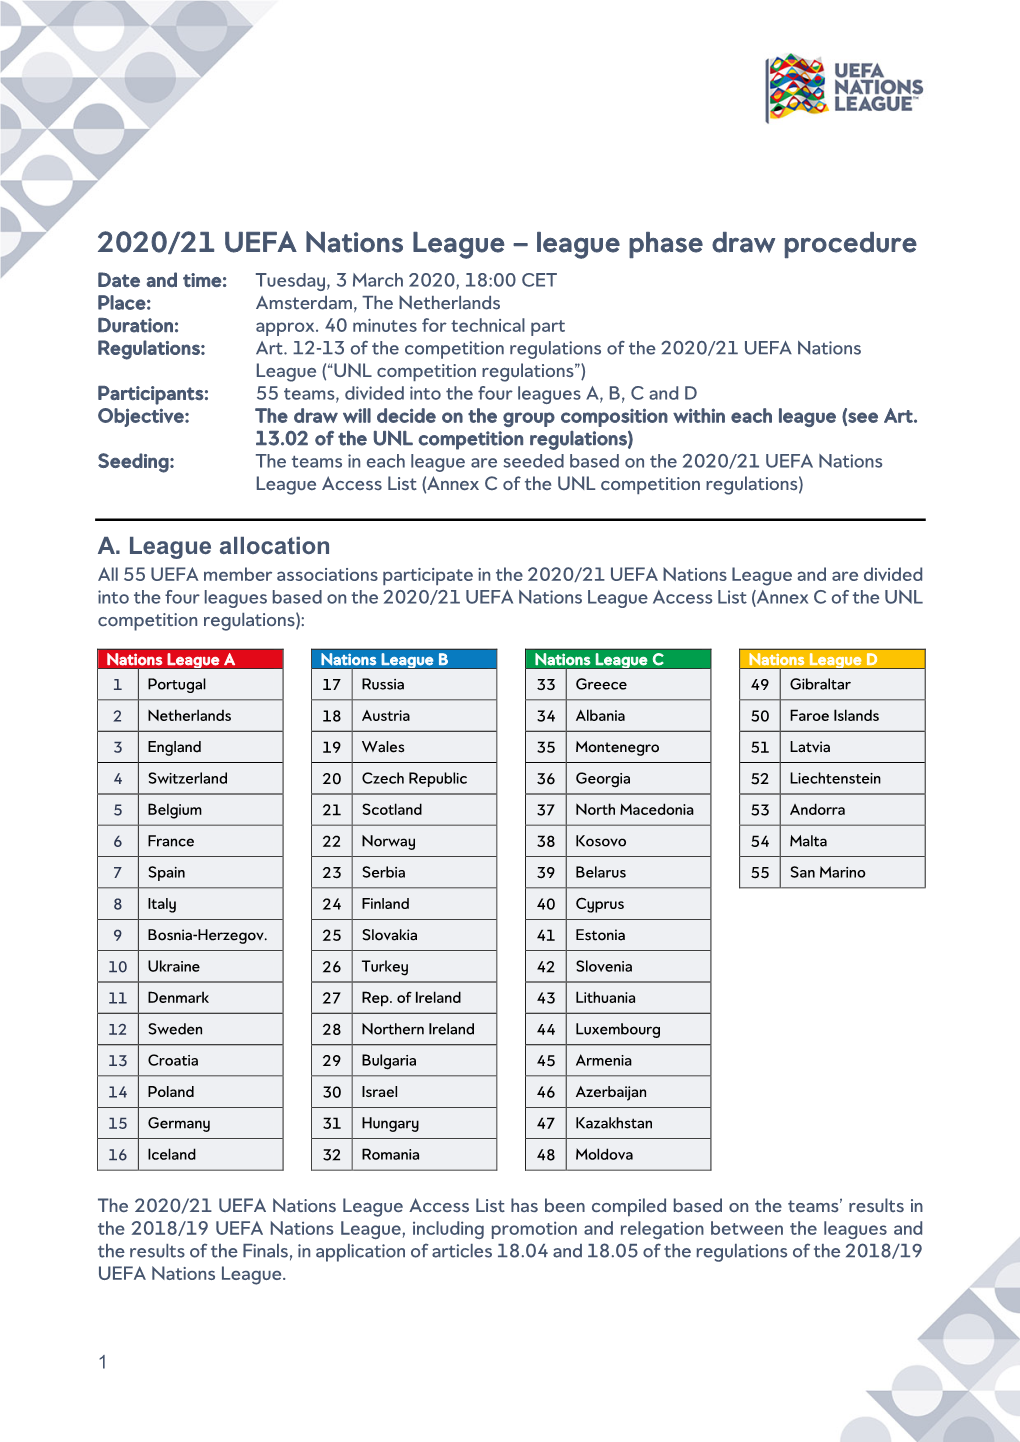 2020/21 UEFA Nations League – League Phase Draw Procedure Date and Time: Tuesday, 3 March 2020, 18:00 CET Place: Amsterdam, the Netherlands Duration: Approx